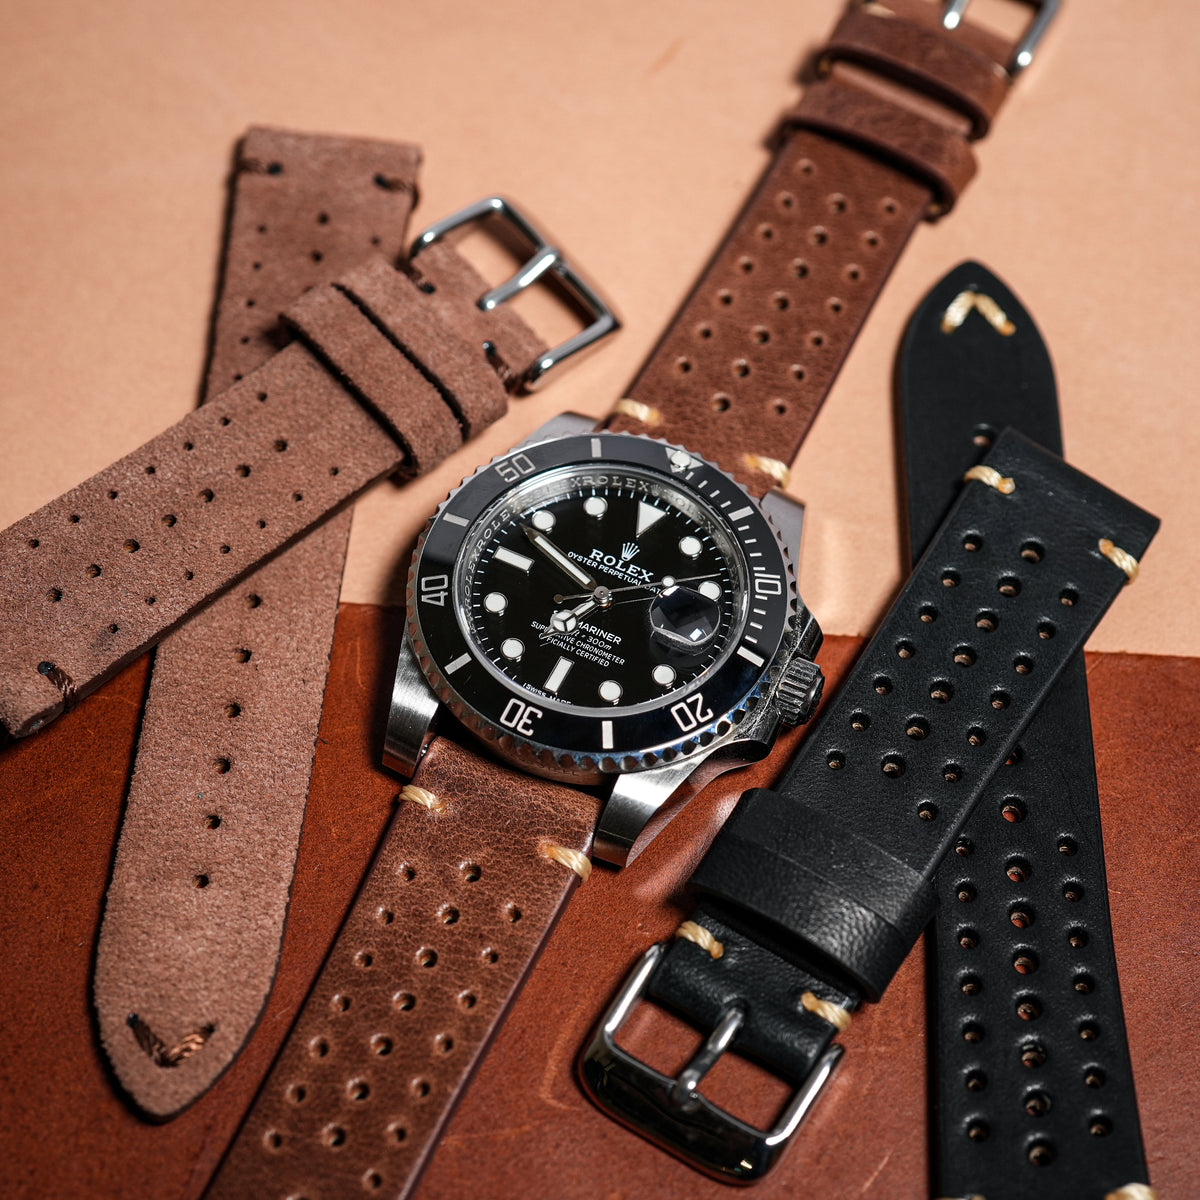 Premium Rally Leather Watch Strap in Tan - Nomad Watch Works SG